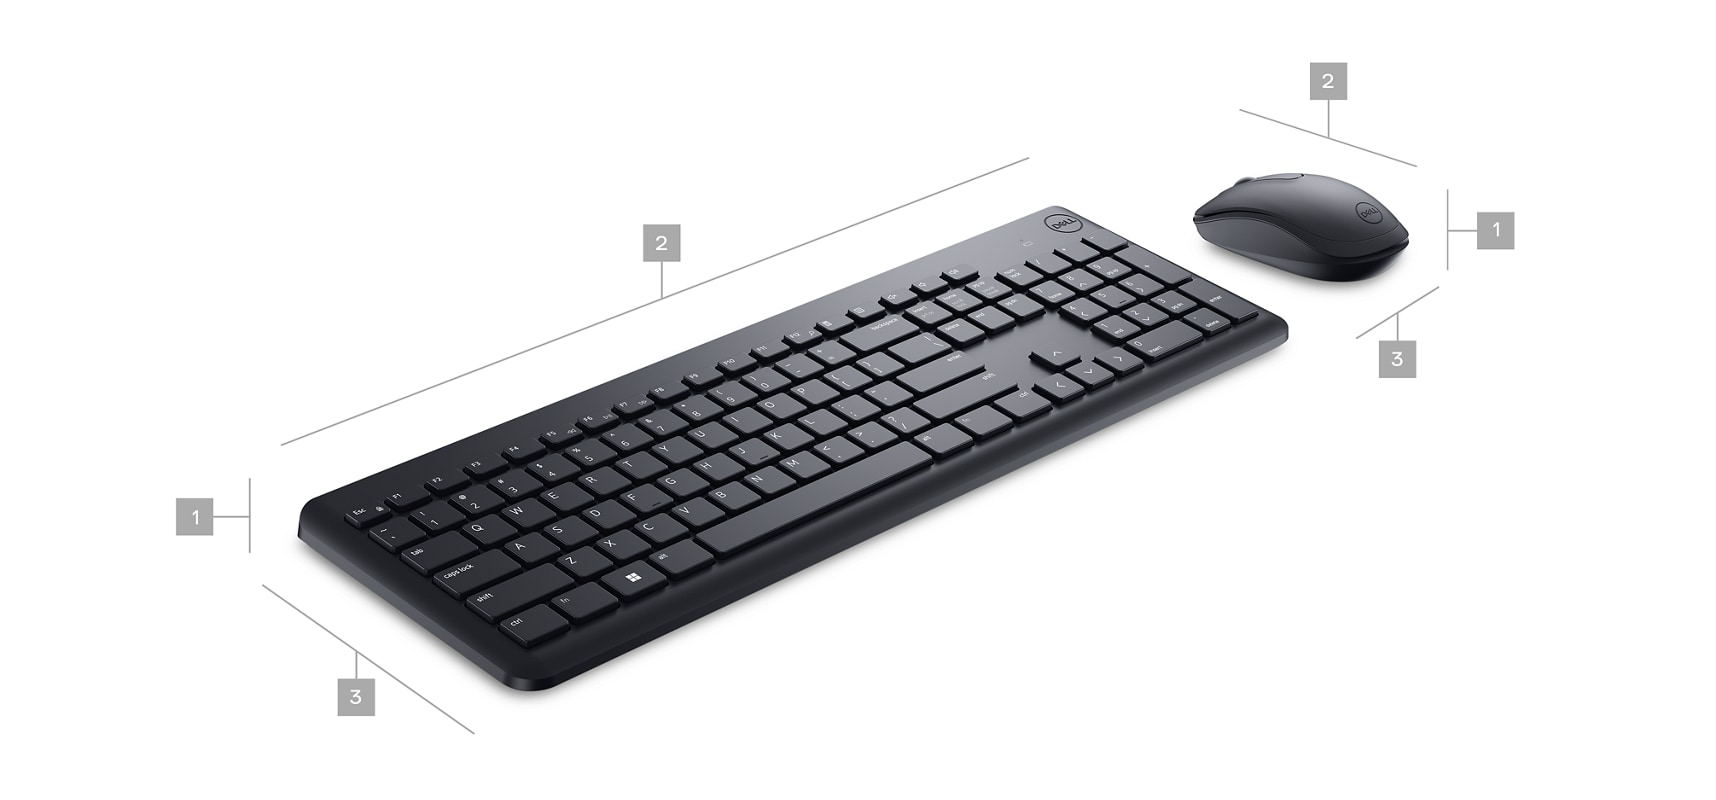 https://i.dell.com/is/image/DellContent/content/dam/ss2/product-images/peripherals/input-devices/dell/keyboards/km3322w/pdp/dell-km3322w-keyboard-mouse-dimensions.psd?qlt=95&fit=constrain%2c1&hei=800&fmt=jpg